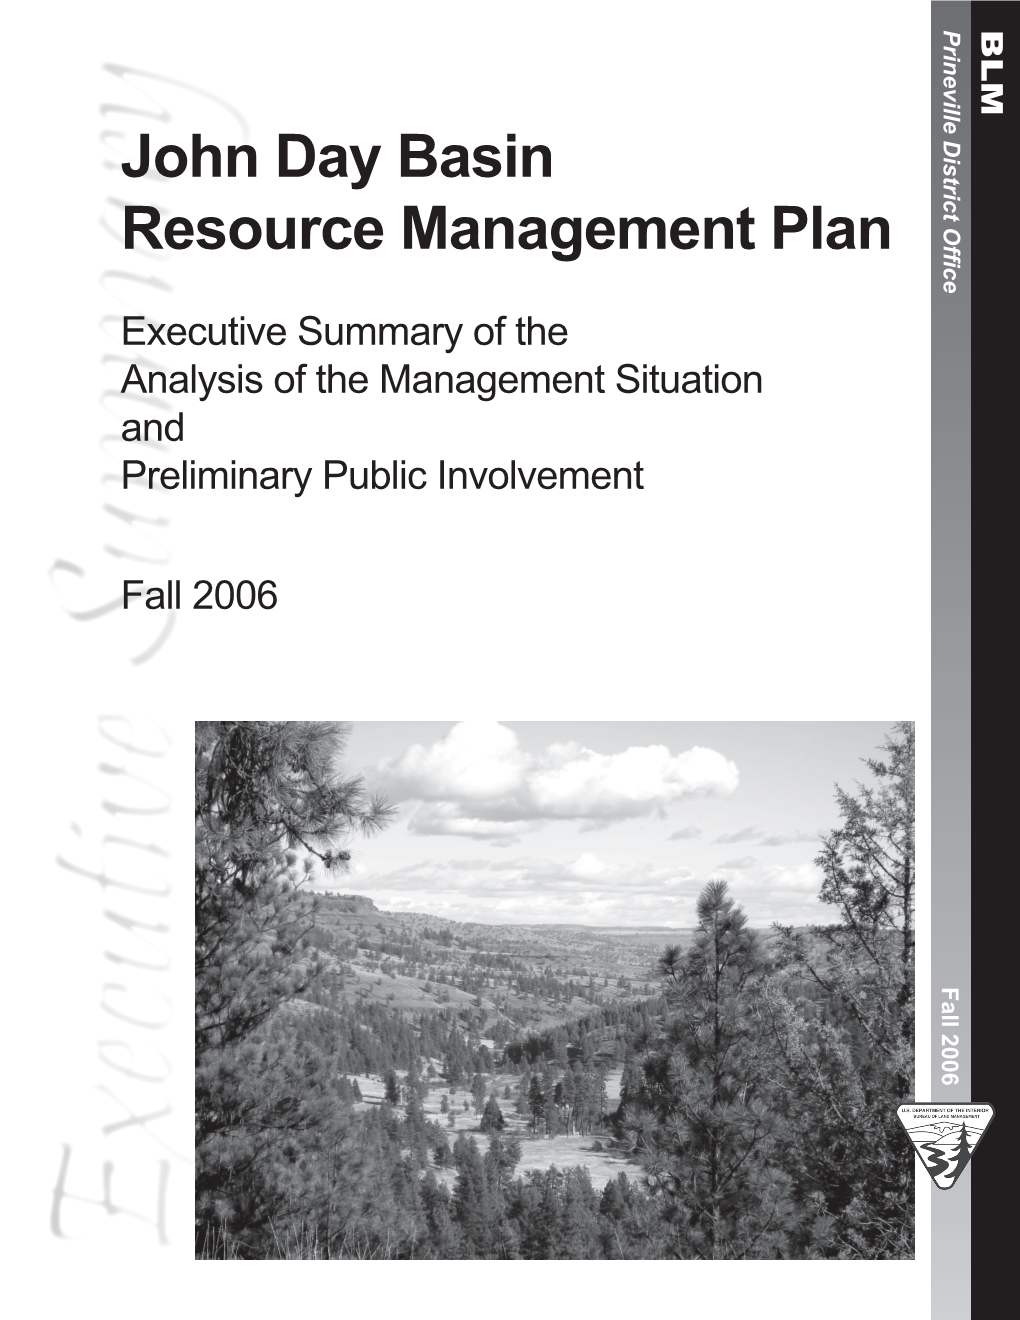 John Day Basin Resource Management Plan Exceutive Summary of the Analysis of the Management Situation and Preliminary Public Involvement Editor’S Thoughts